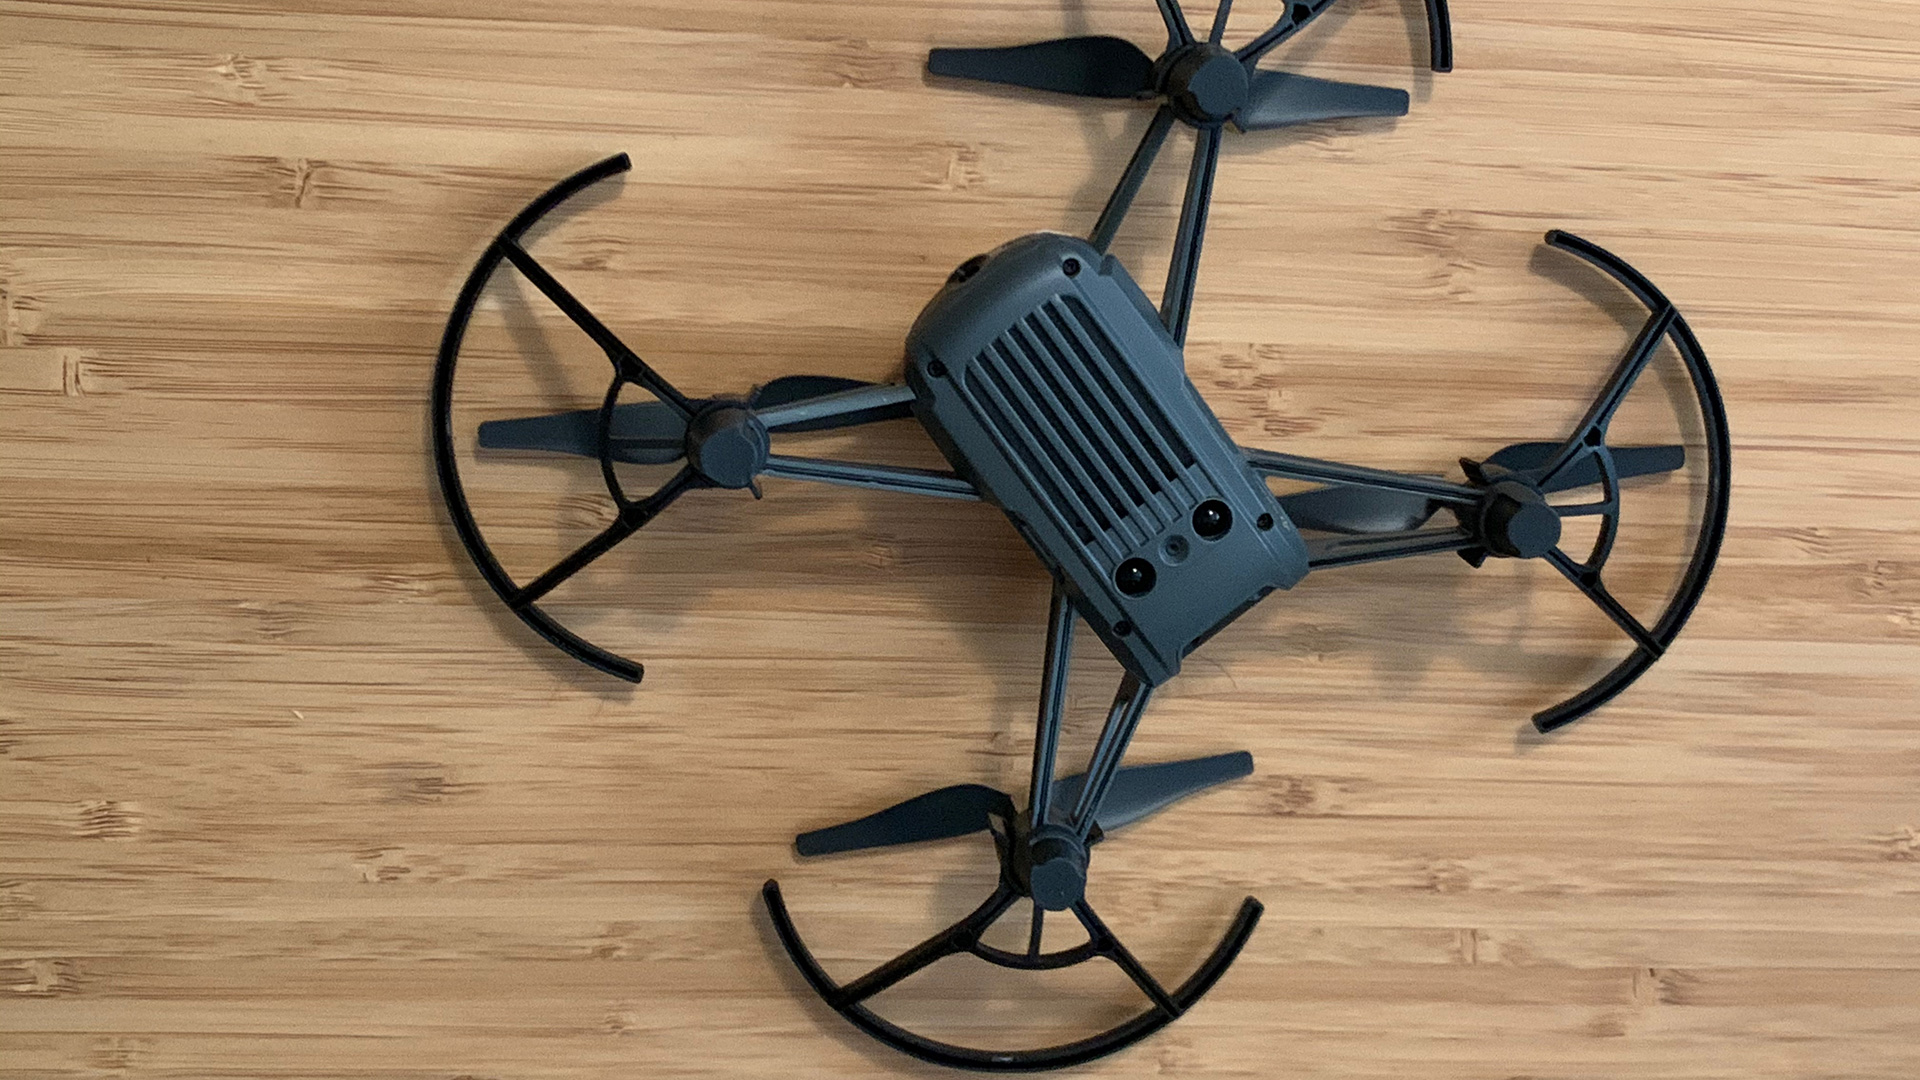 Ryze Tello drone review: precise moves and incredible stability | T3